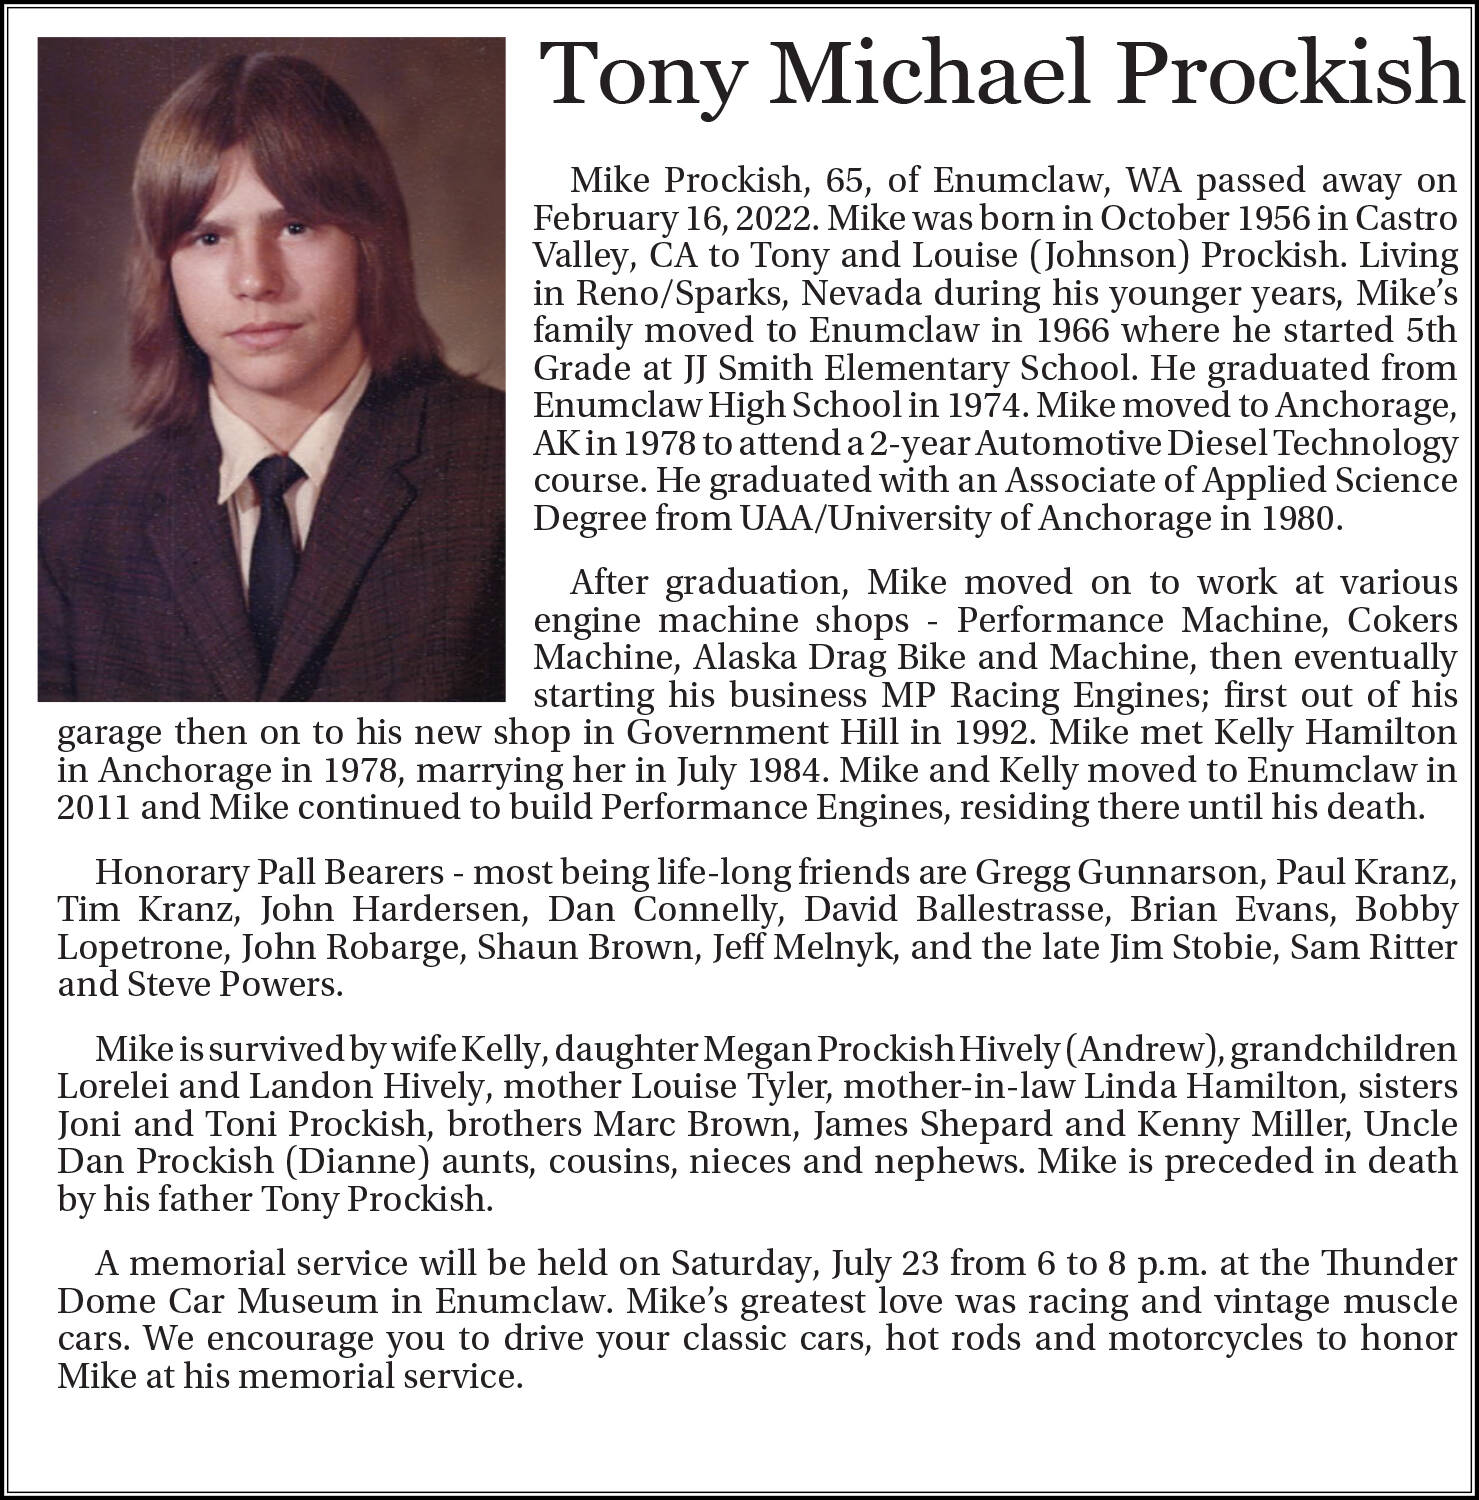 Tony Michael Prockish, of Enumclaw, died February 16 at the age of 65.